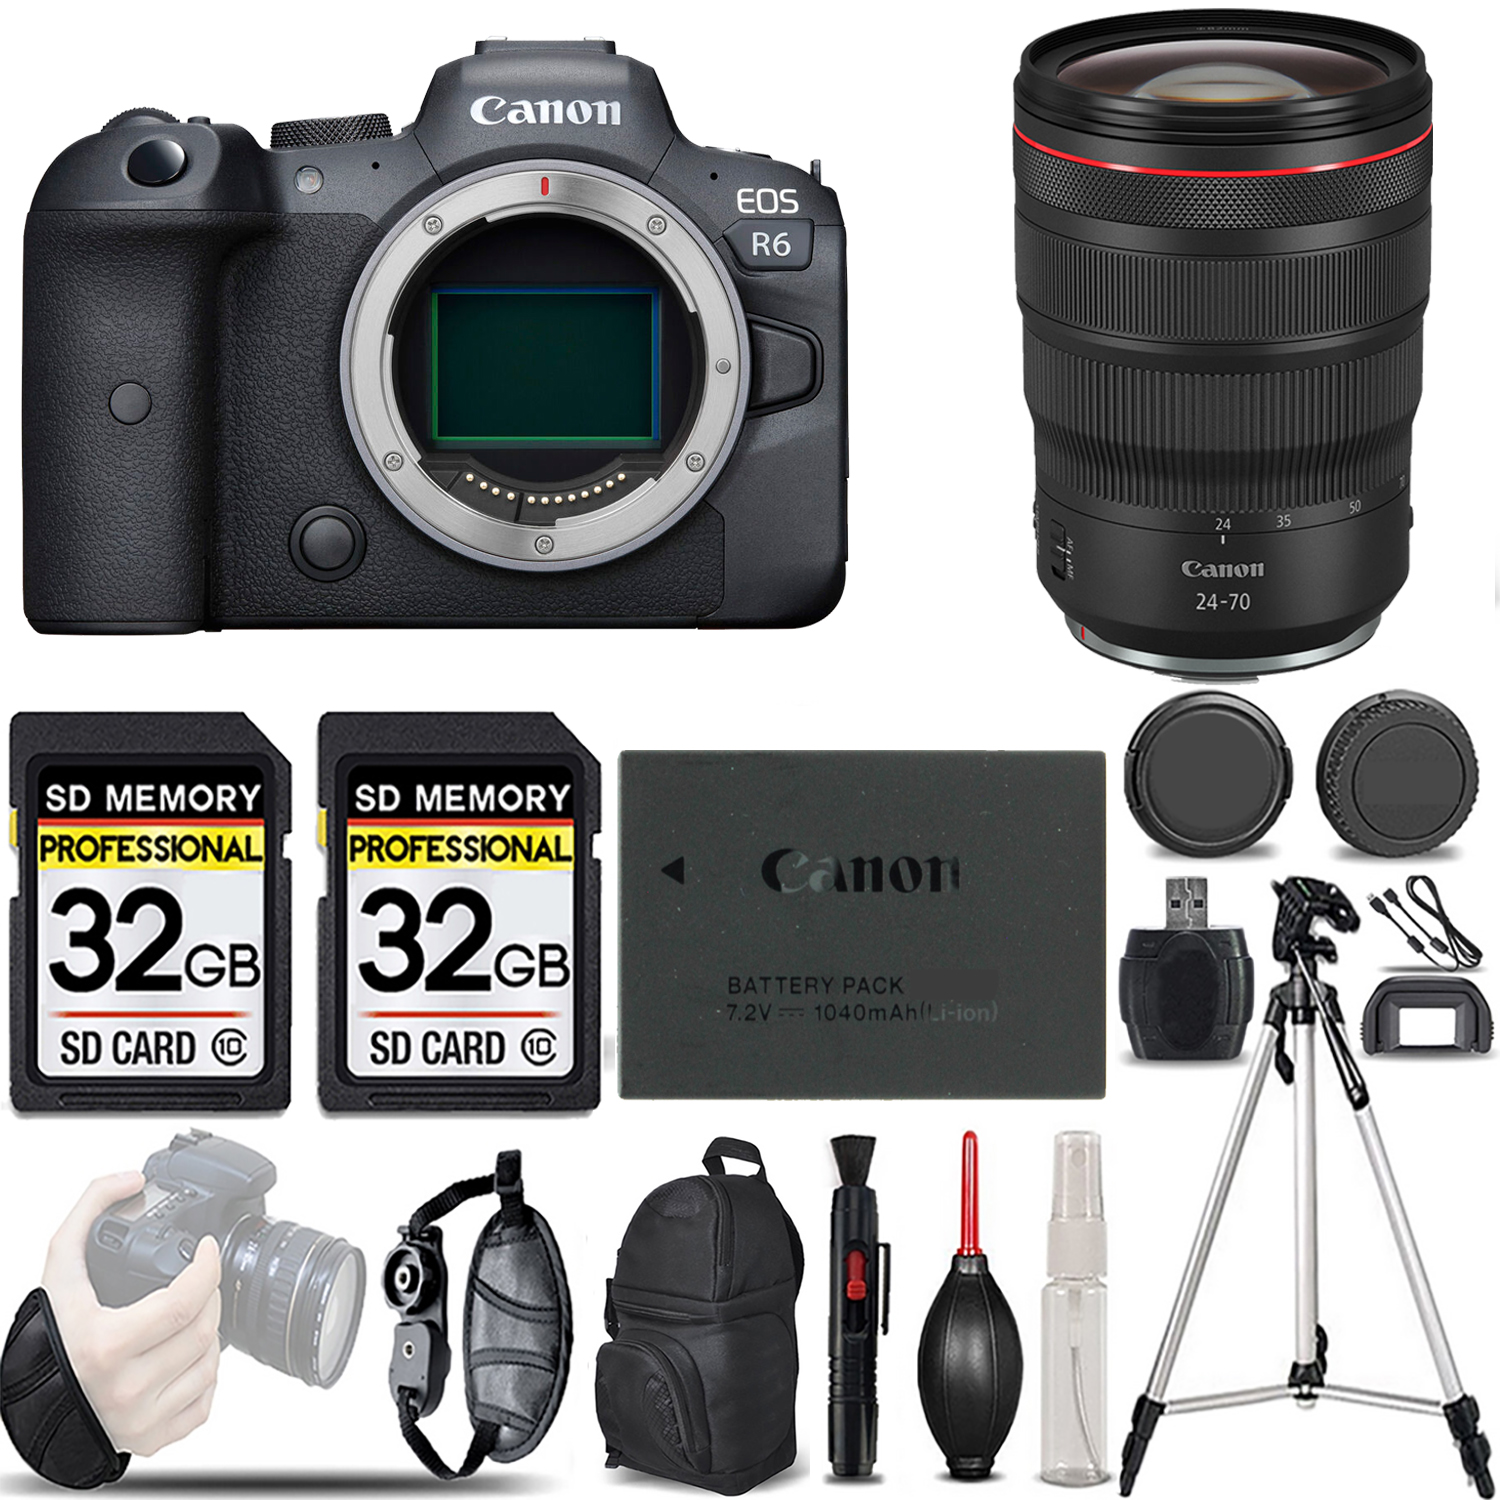 EOS R6 Mirrorless Camera + 24-70mm f/2.8 L IS USM Lens - LOADED KIT *FREE SHIPPING*